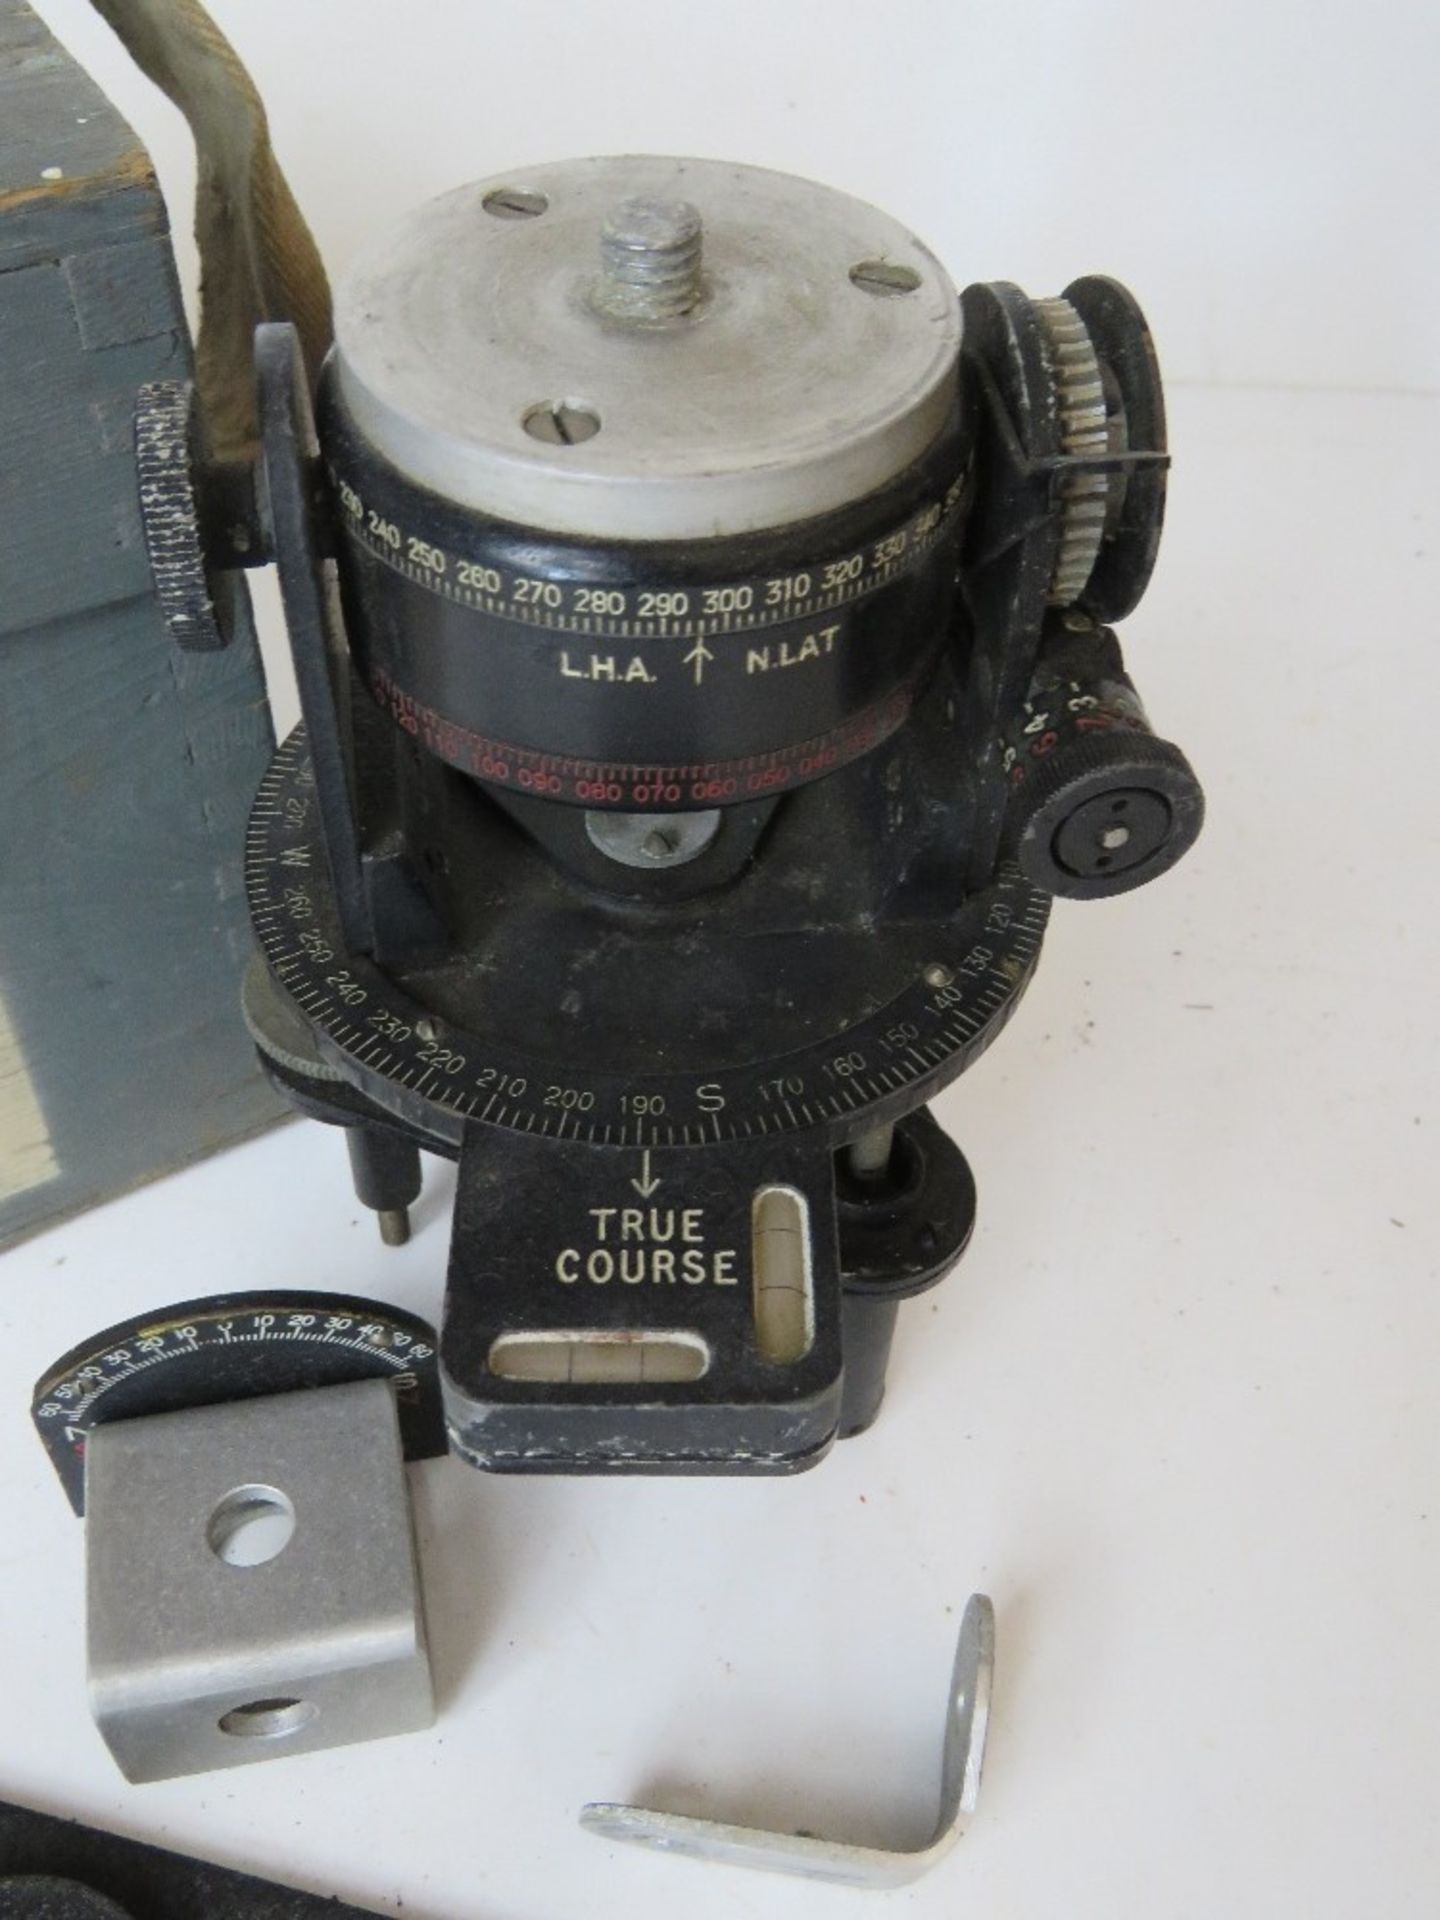 An Astro compass MkII in original box. - Image 2 of 3